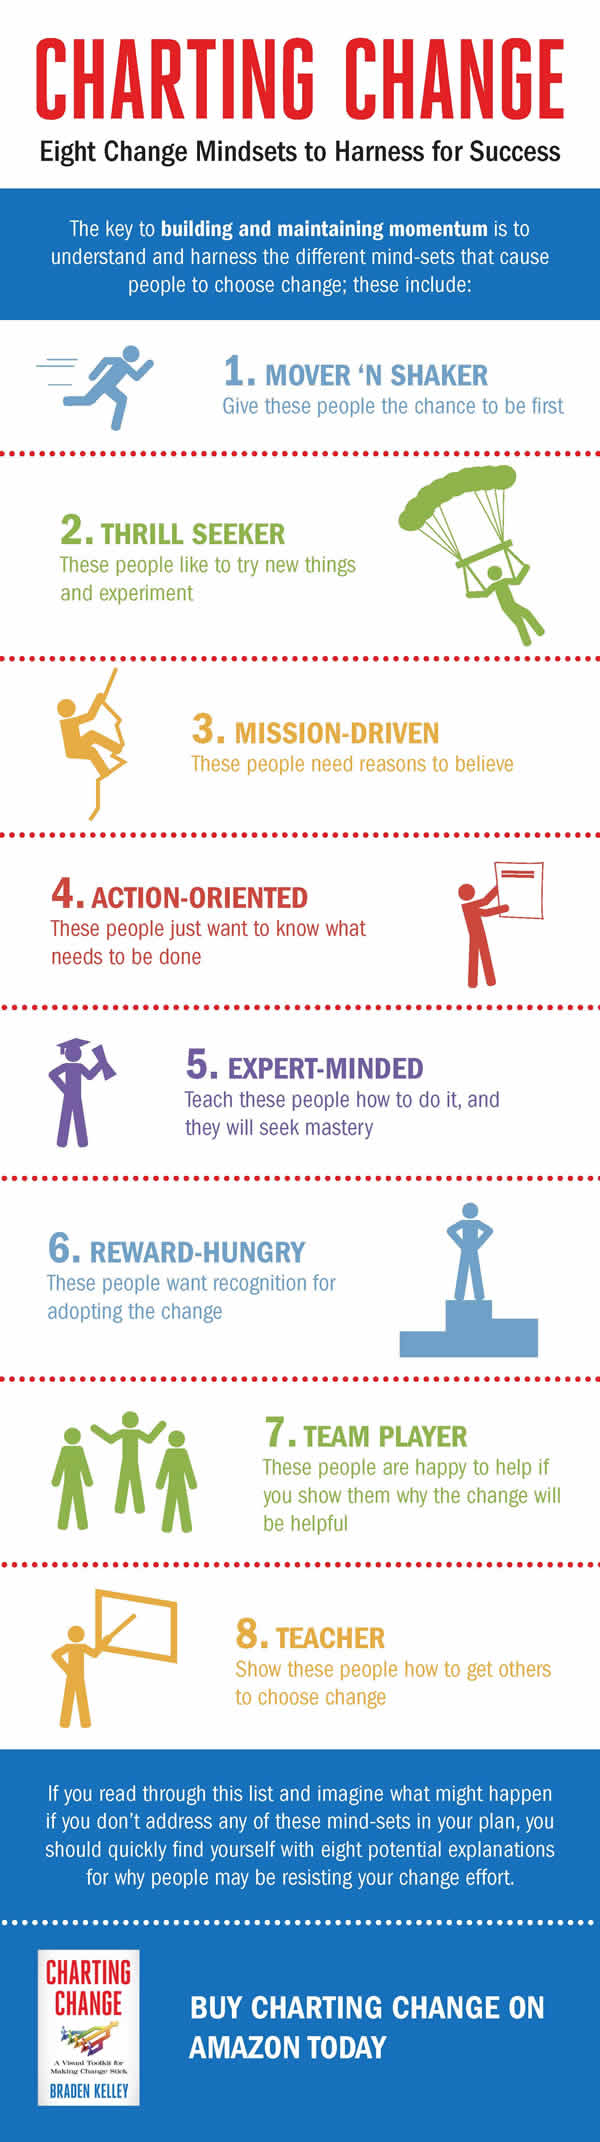 Eight Change Mindsets Infographic